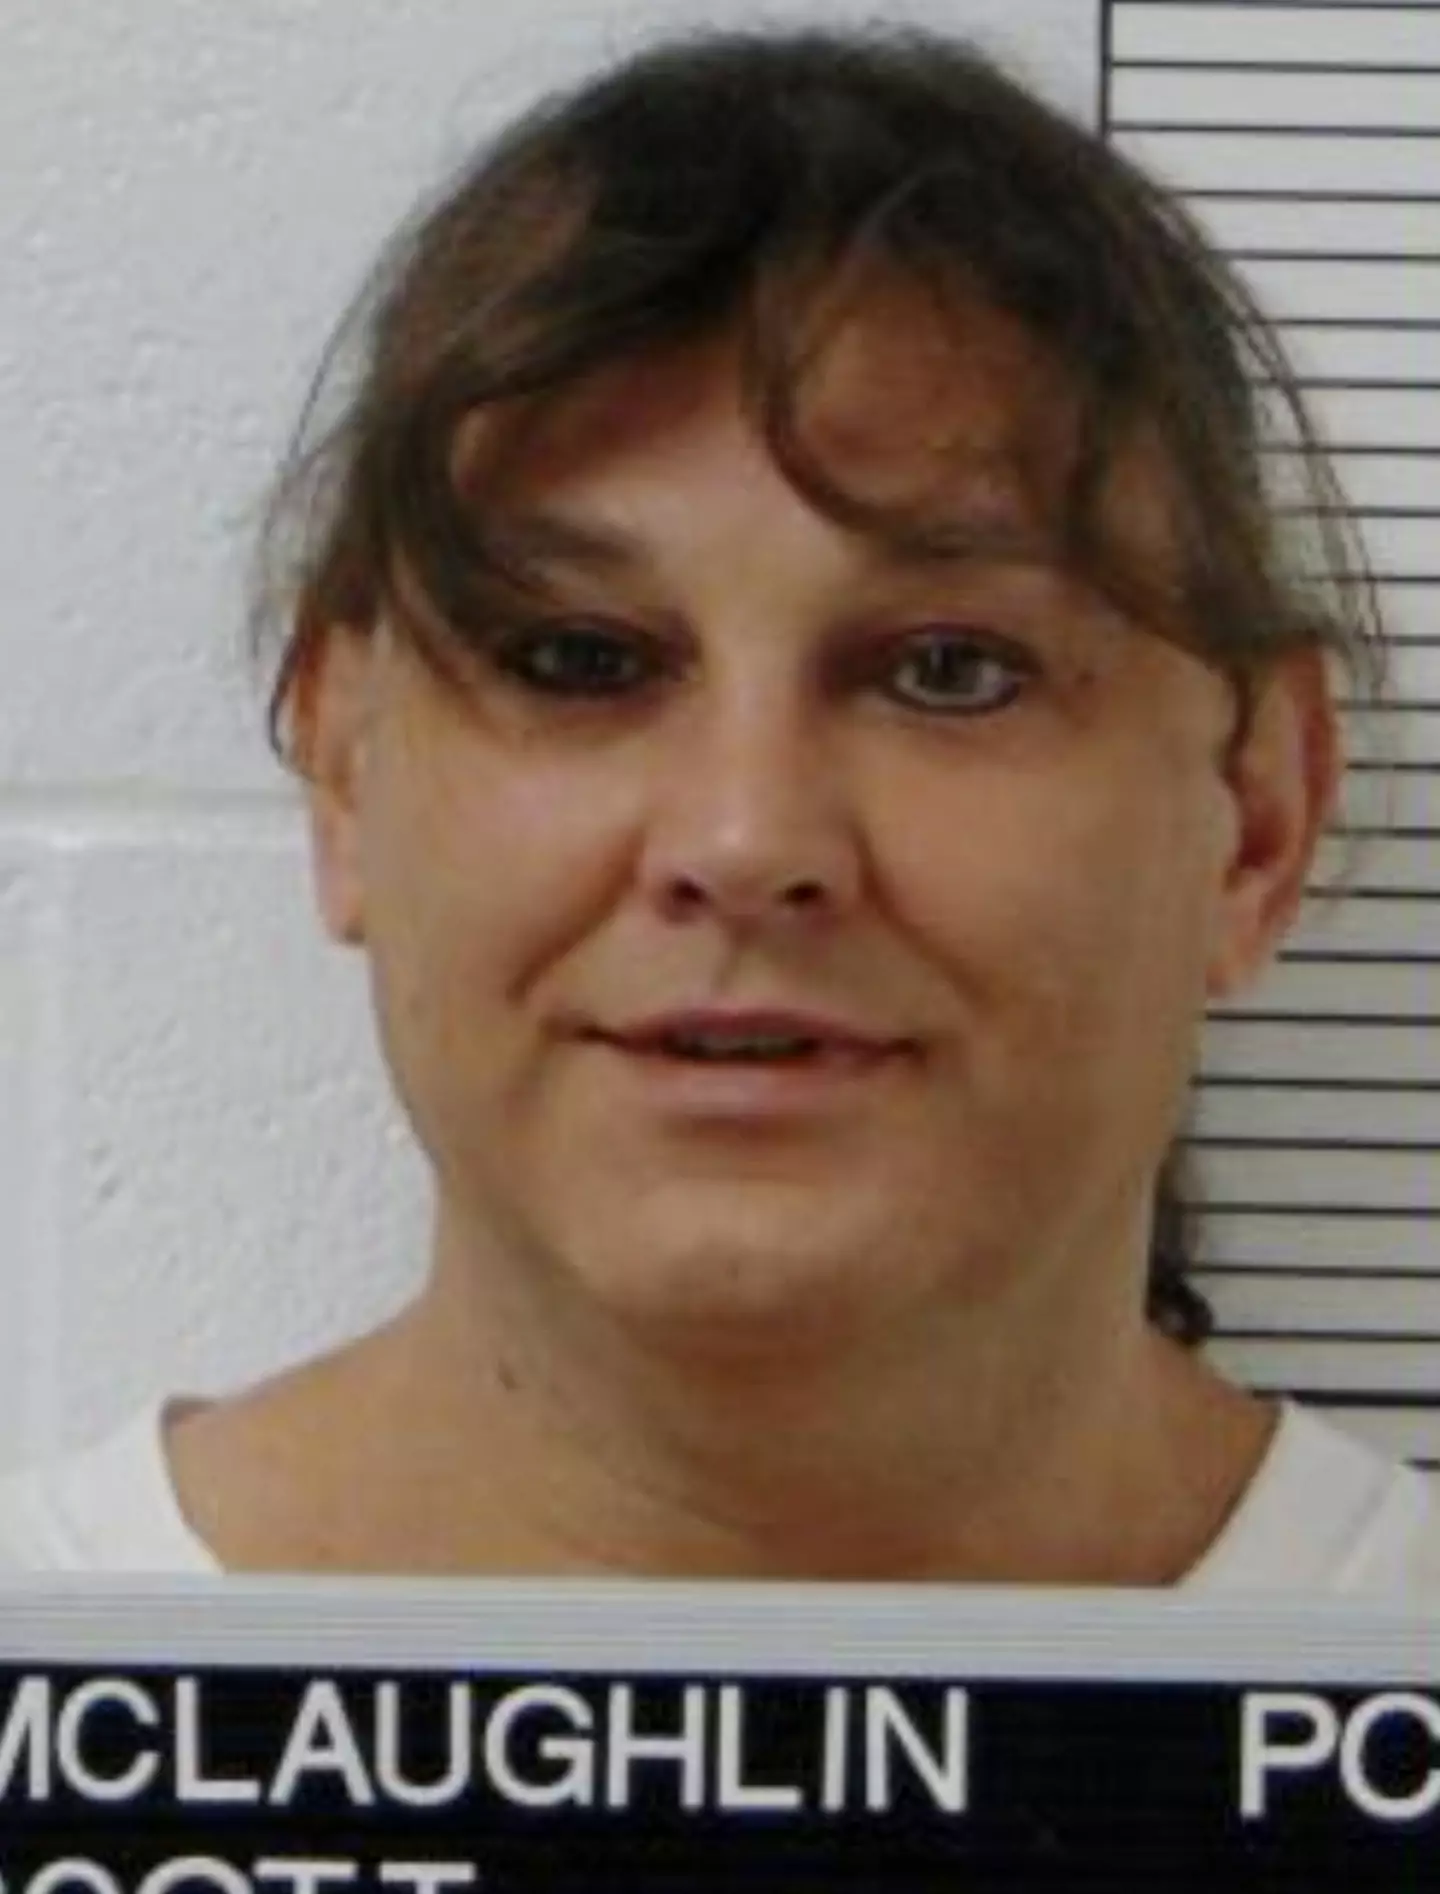 She was initially given the death sentence in 2006 for the murder of Beverly Guenther.